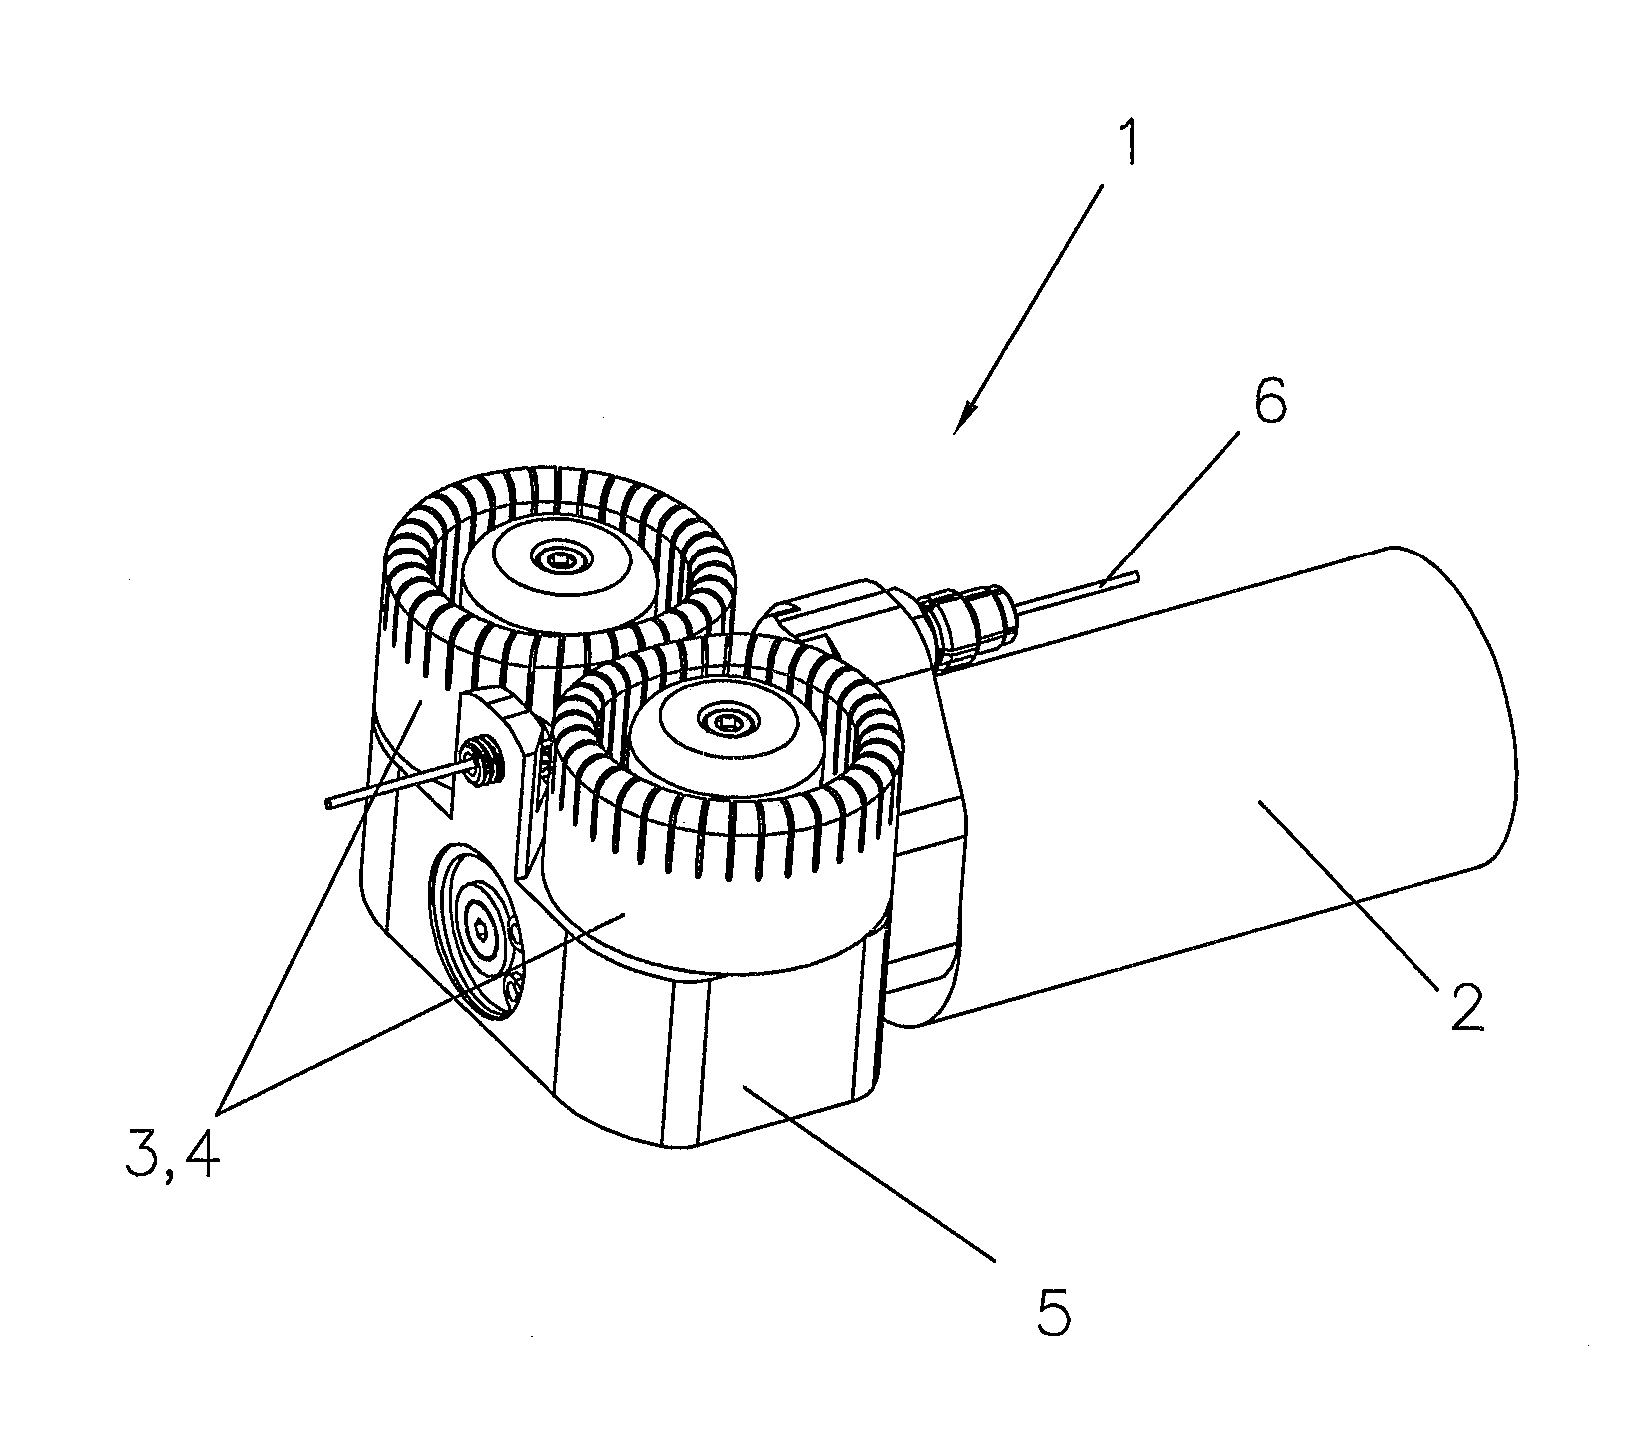 Welding wire conveyor roller and feeding device for conveying welding wire